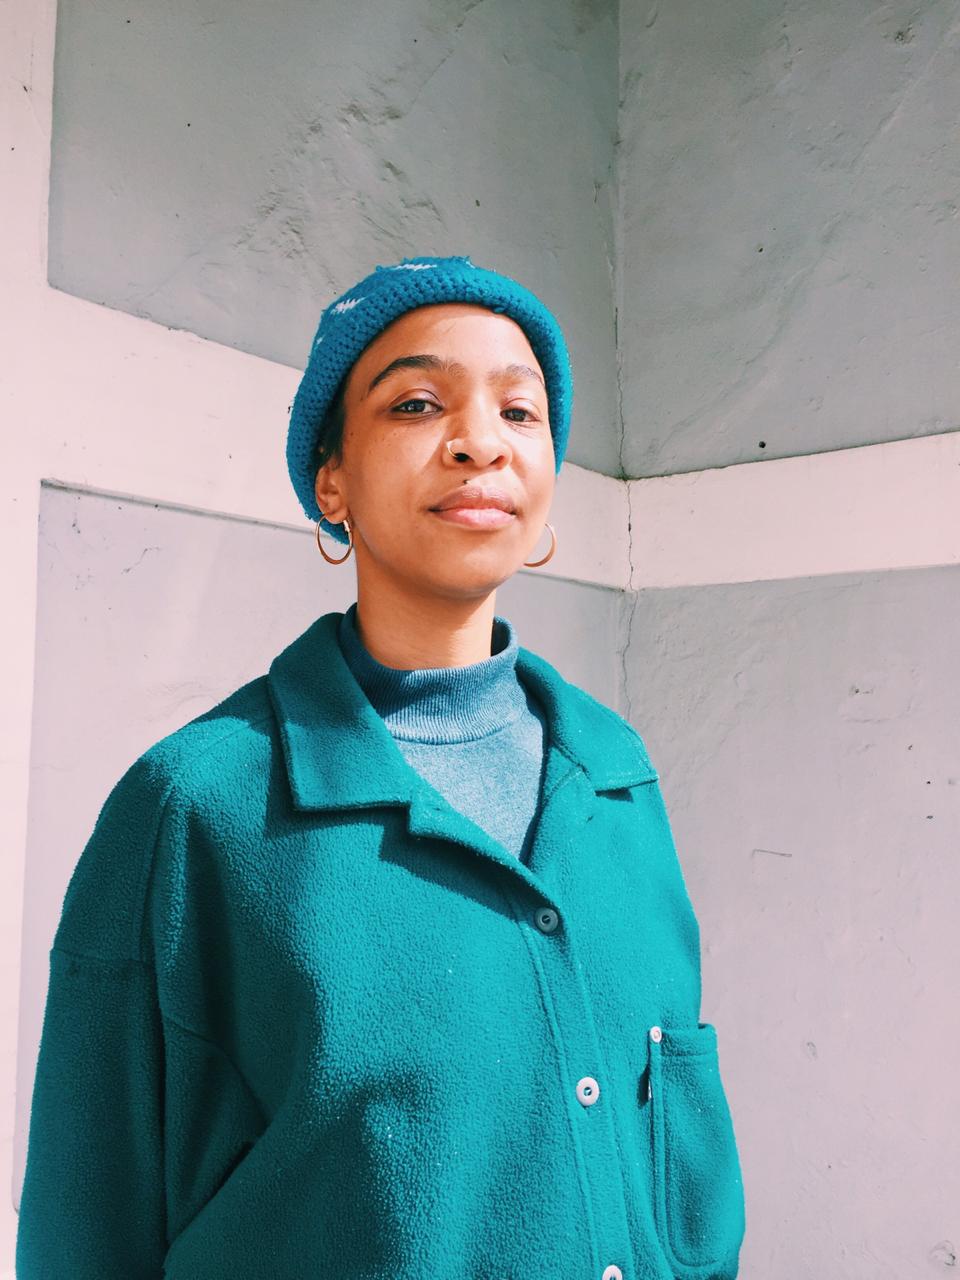 An African women wearing hoop earrings, a blue beanie, blue turtle neck and teal wool cardigan is standing tall in front of a concrete painted wall.